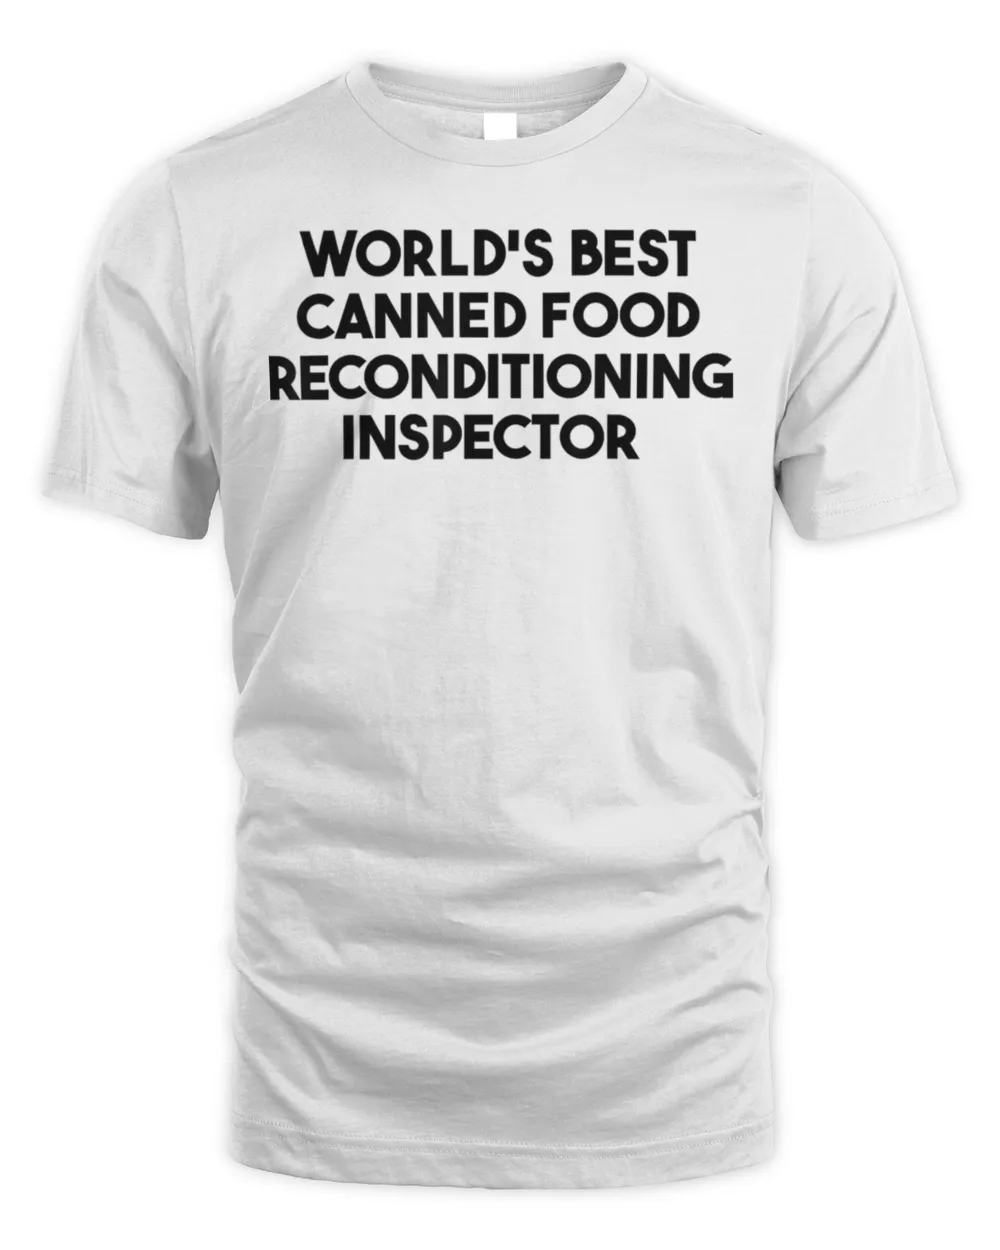 World’s Best Canned Food Reconditioning Inspector Shirt